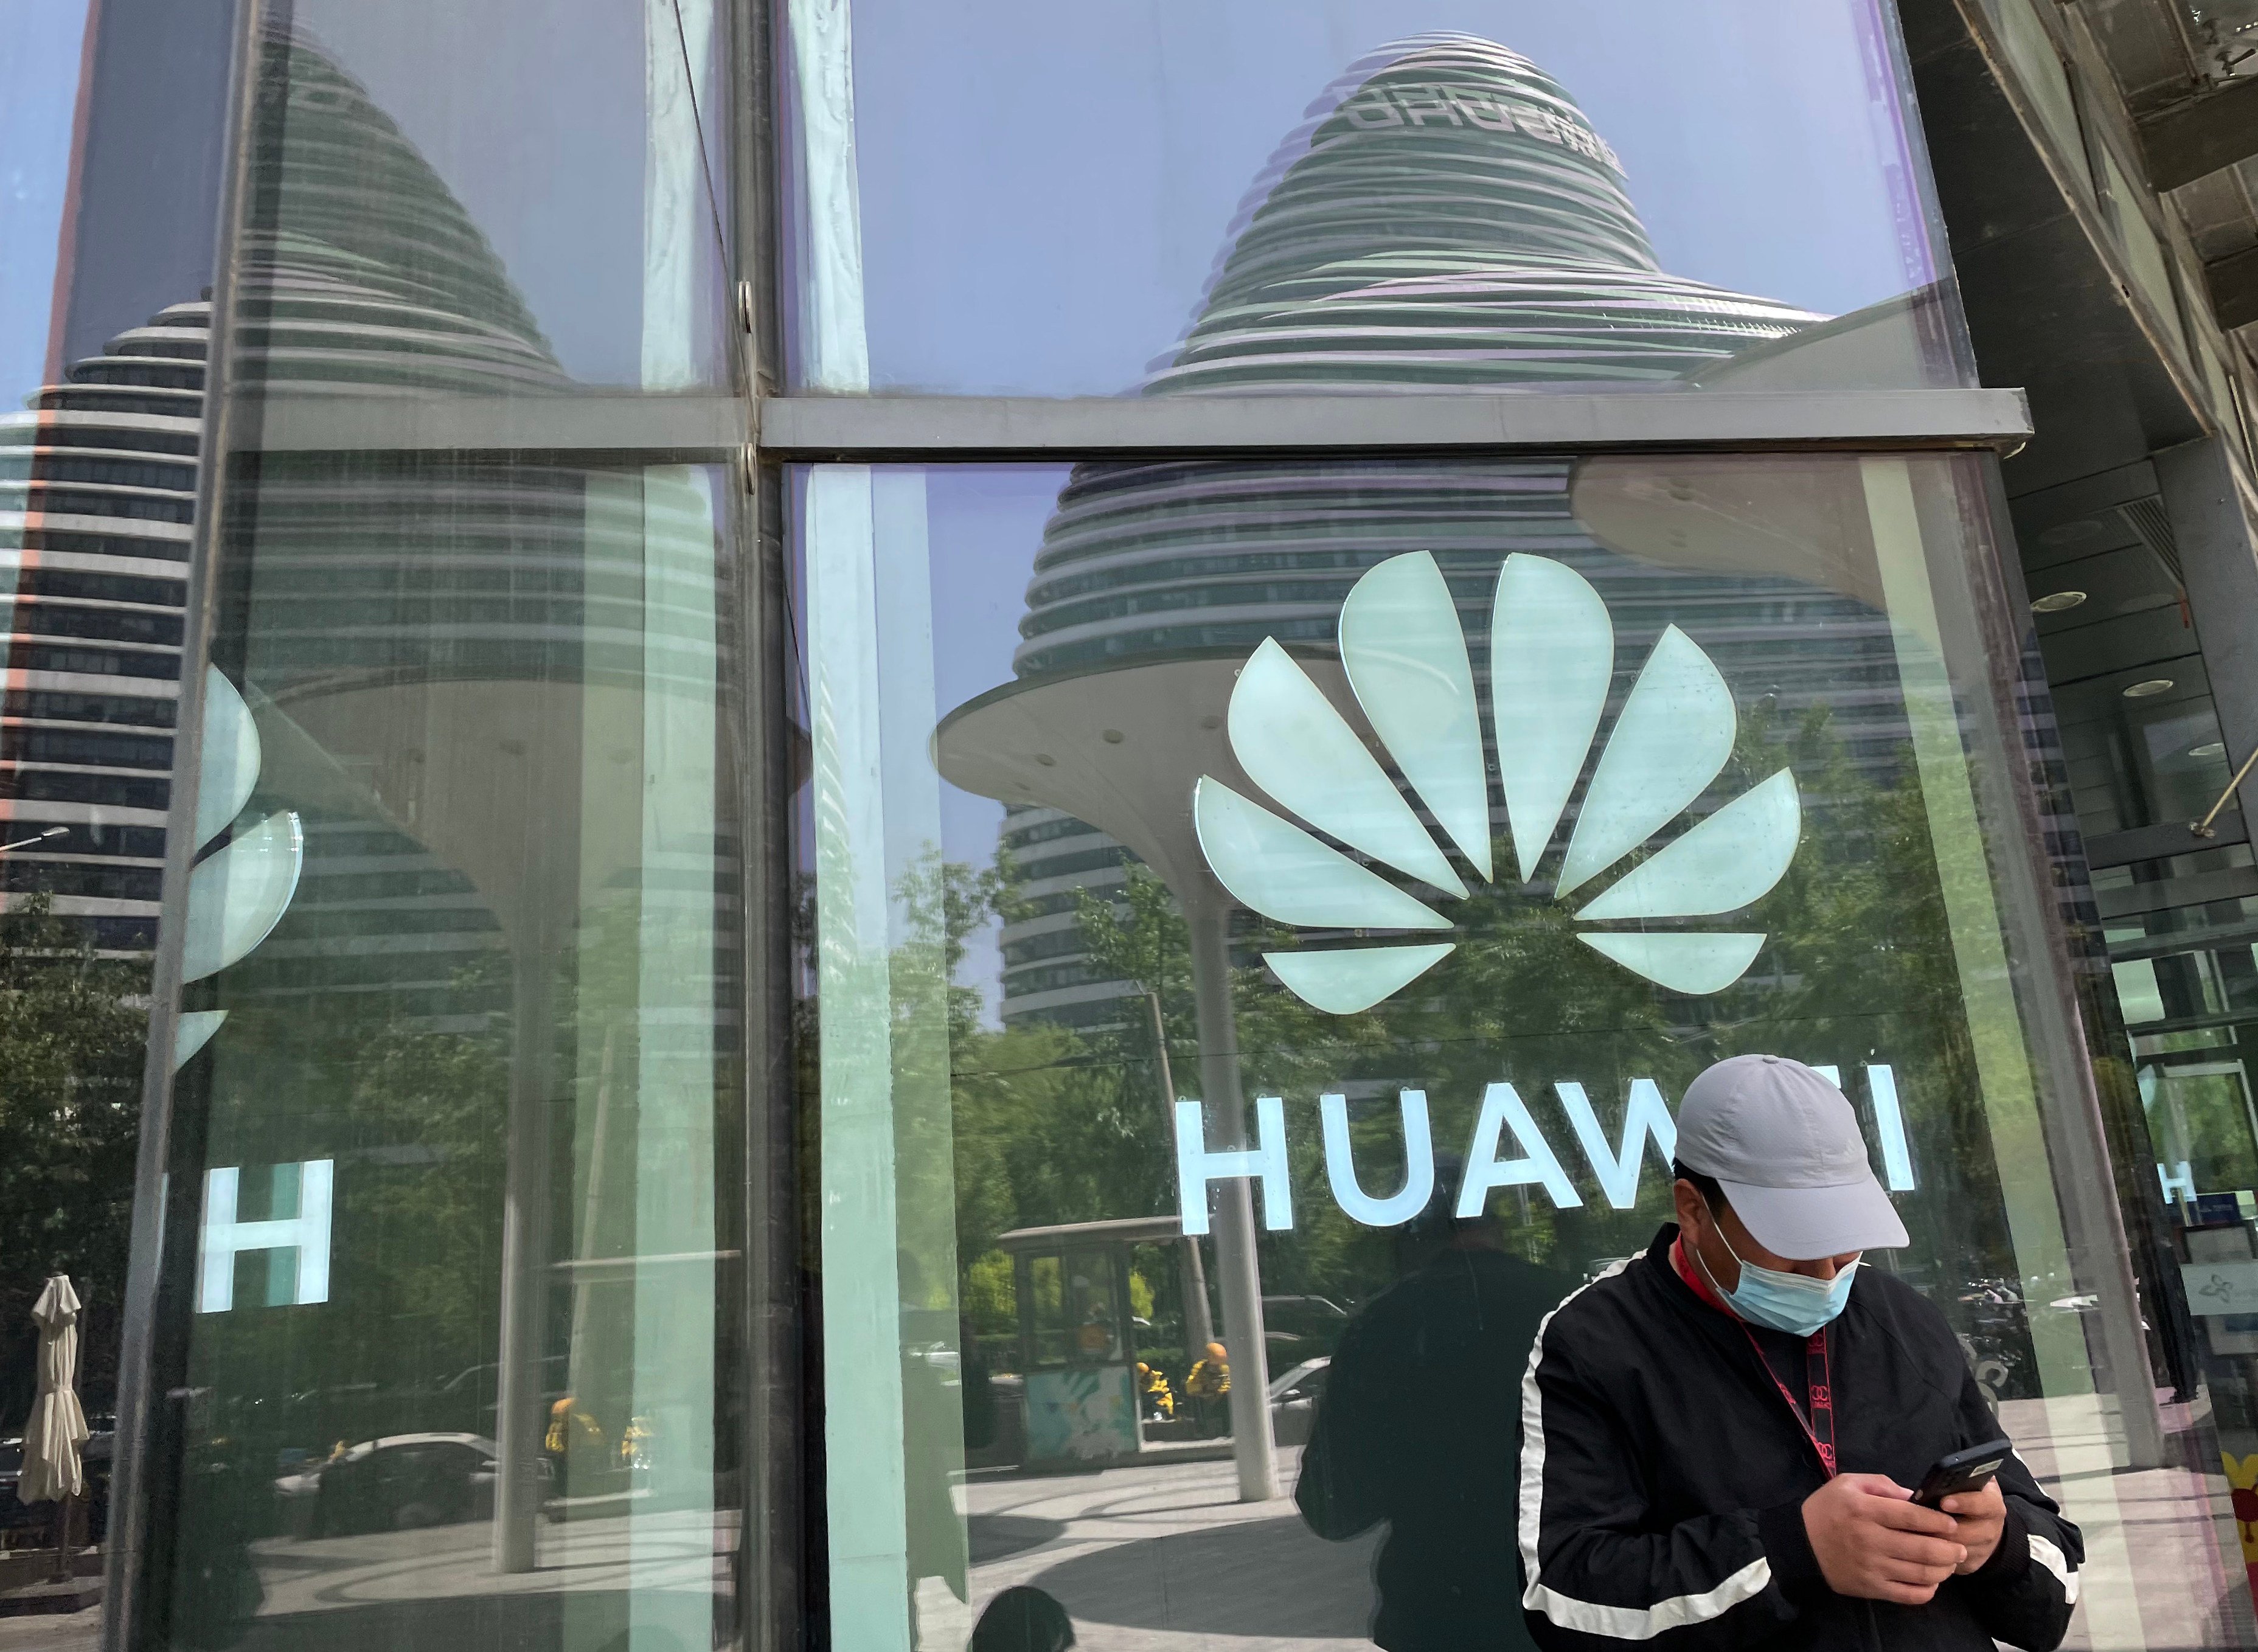 A man reads from his mobile phone in front of Huawei’s logo in Beijing on April 27. Photo: Simon Song